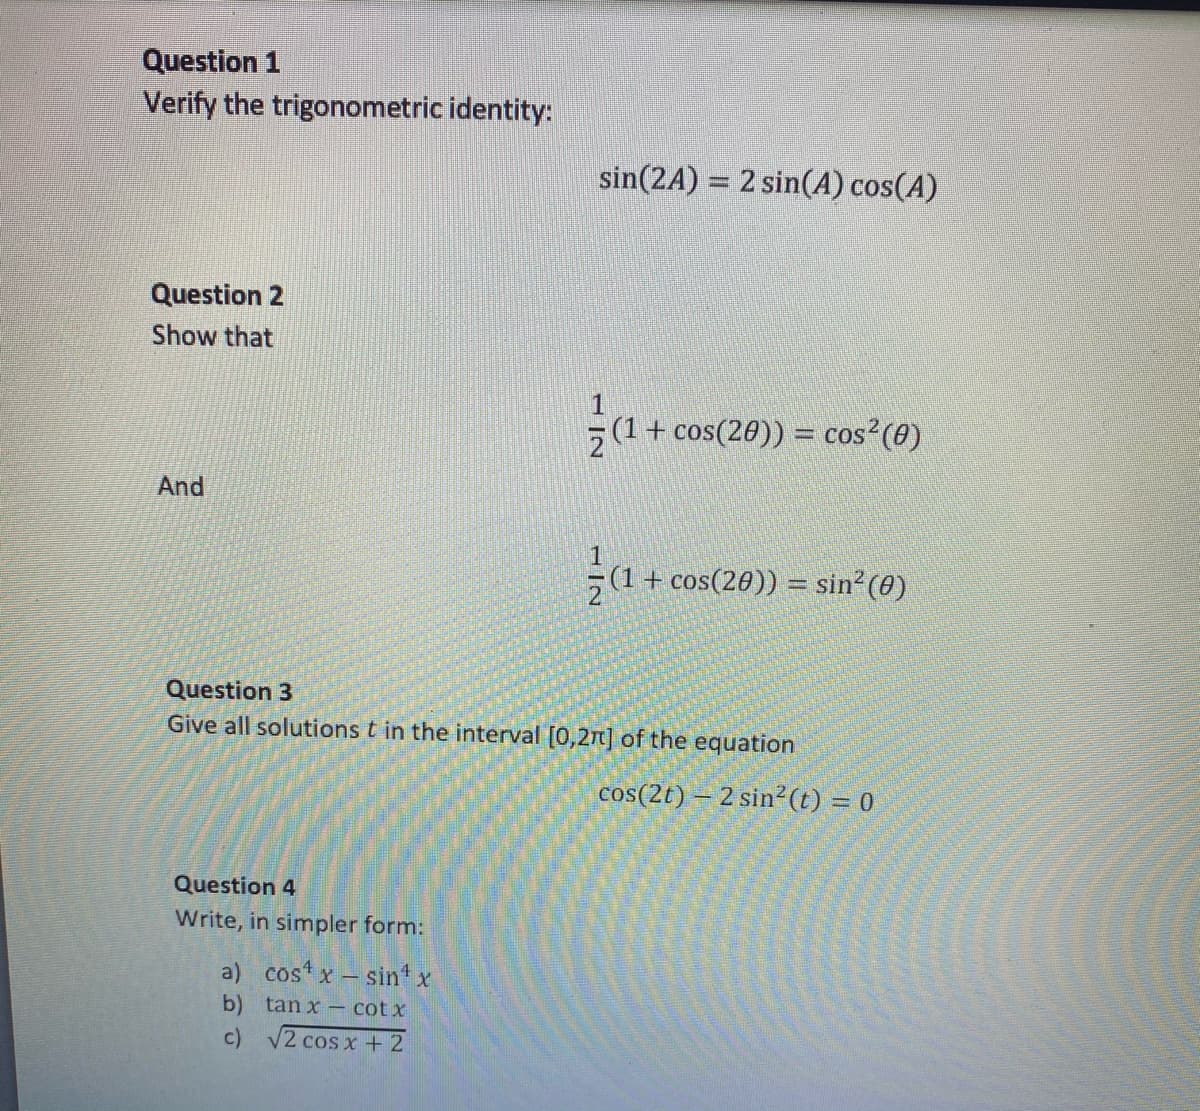 Question 1
Verify the trigonometric identity:
Question 2
Show that
And
Question 4
Write, in simpler form:
sin(2A) = 2 sin(A) cos(A)
a) cos x - sinª x
b) tanx - cotx
c)
√2 cos x + 2
1
(1 + cos(20)) = cos² (0)
Question 3
Give all solutions t in the interval [0,27] of the equation
¼/α+
(1 + cos(20)) = sin² (0)
cos(2t) - 2 sin² (t) = 0